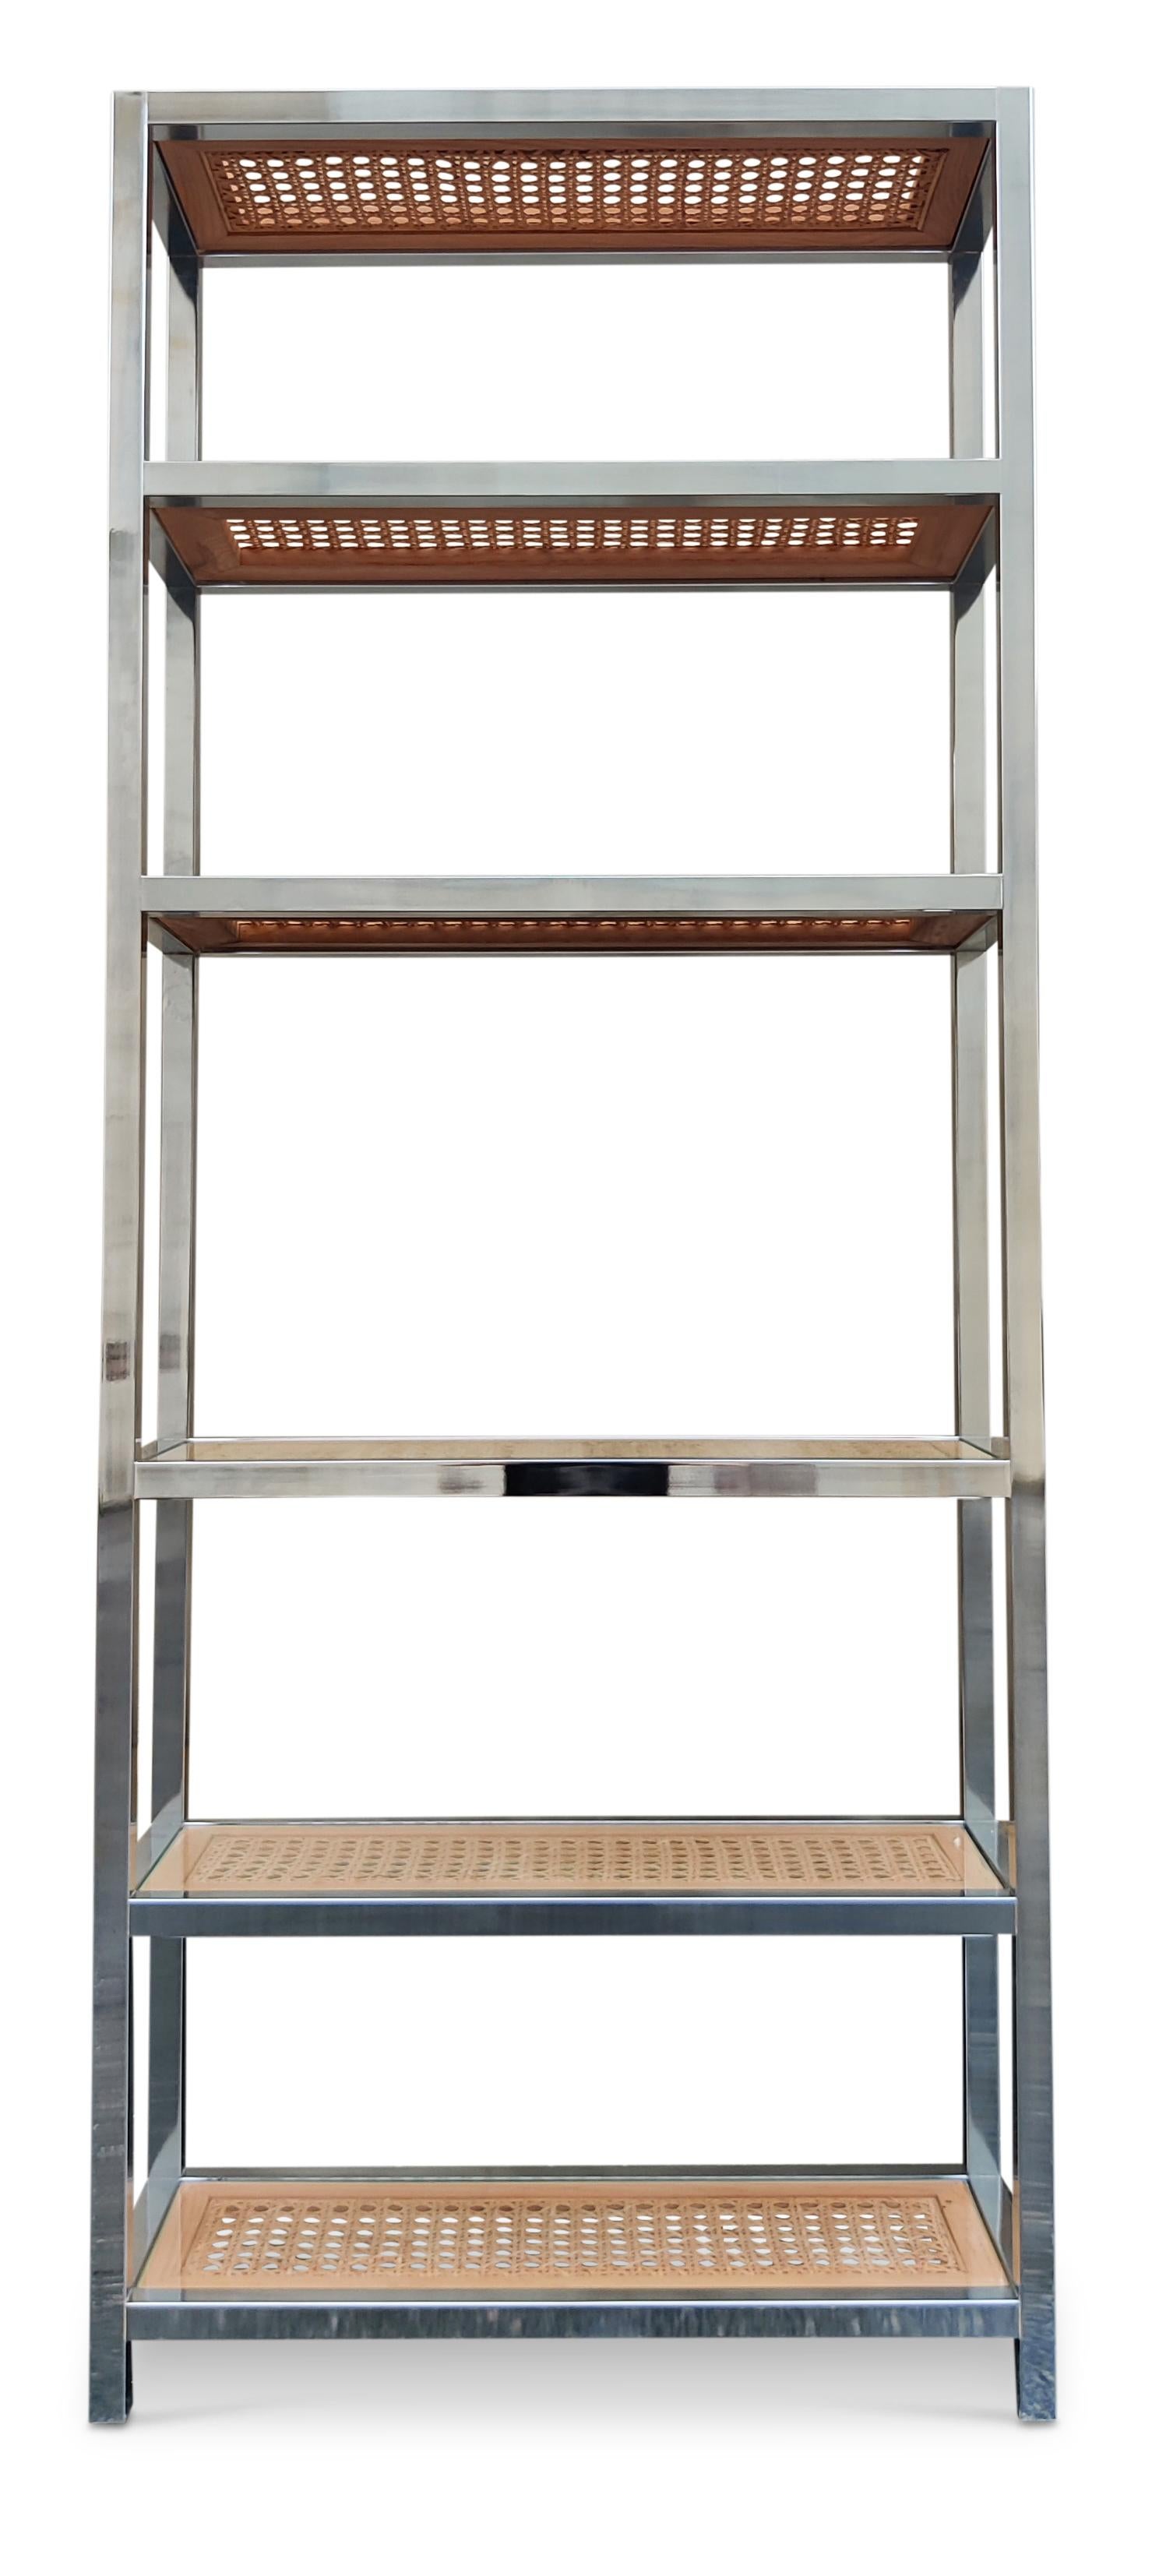 This tall, narrow, and elegant etagere was designed in the 1980s in the style of Gabriella Crespi or Milo Baughman, who is famous in part for his iconic etagere designs. This exmaple is made of 1 1/4 inch thick chromed steel for the frame and has 6